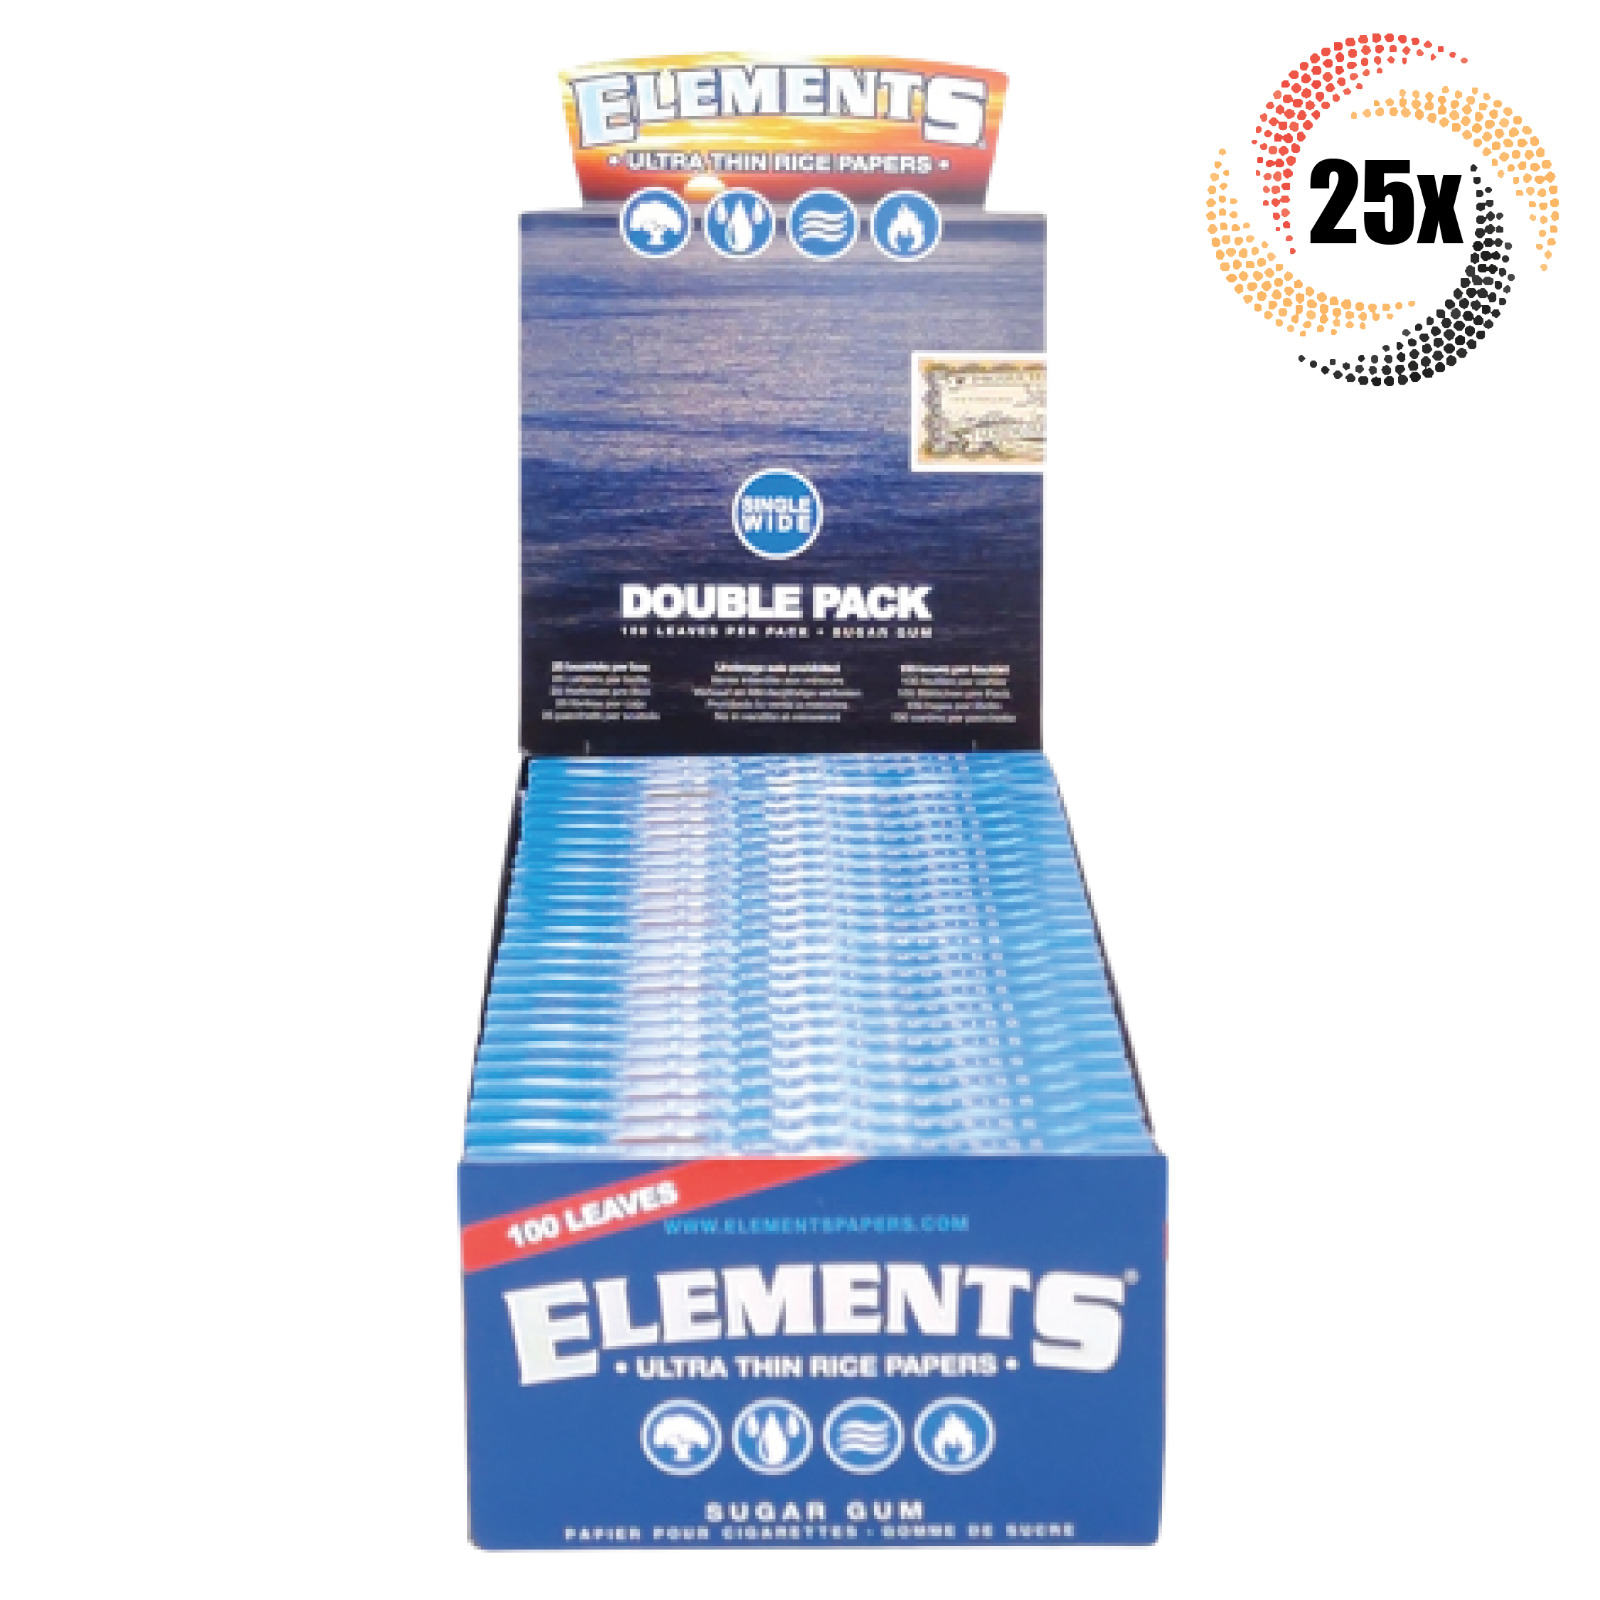 Full Box 25x Packs Elements Single Wide 1.0 | 100 Papers Each | 2 Rolling Tubes